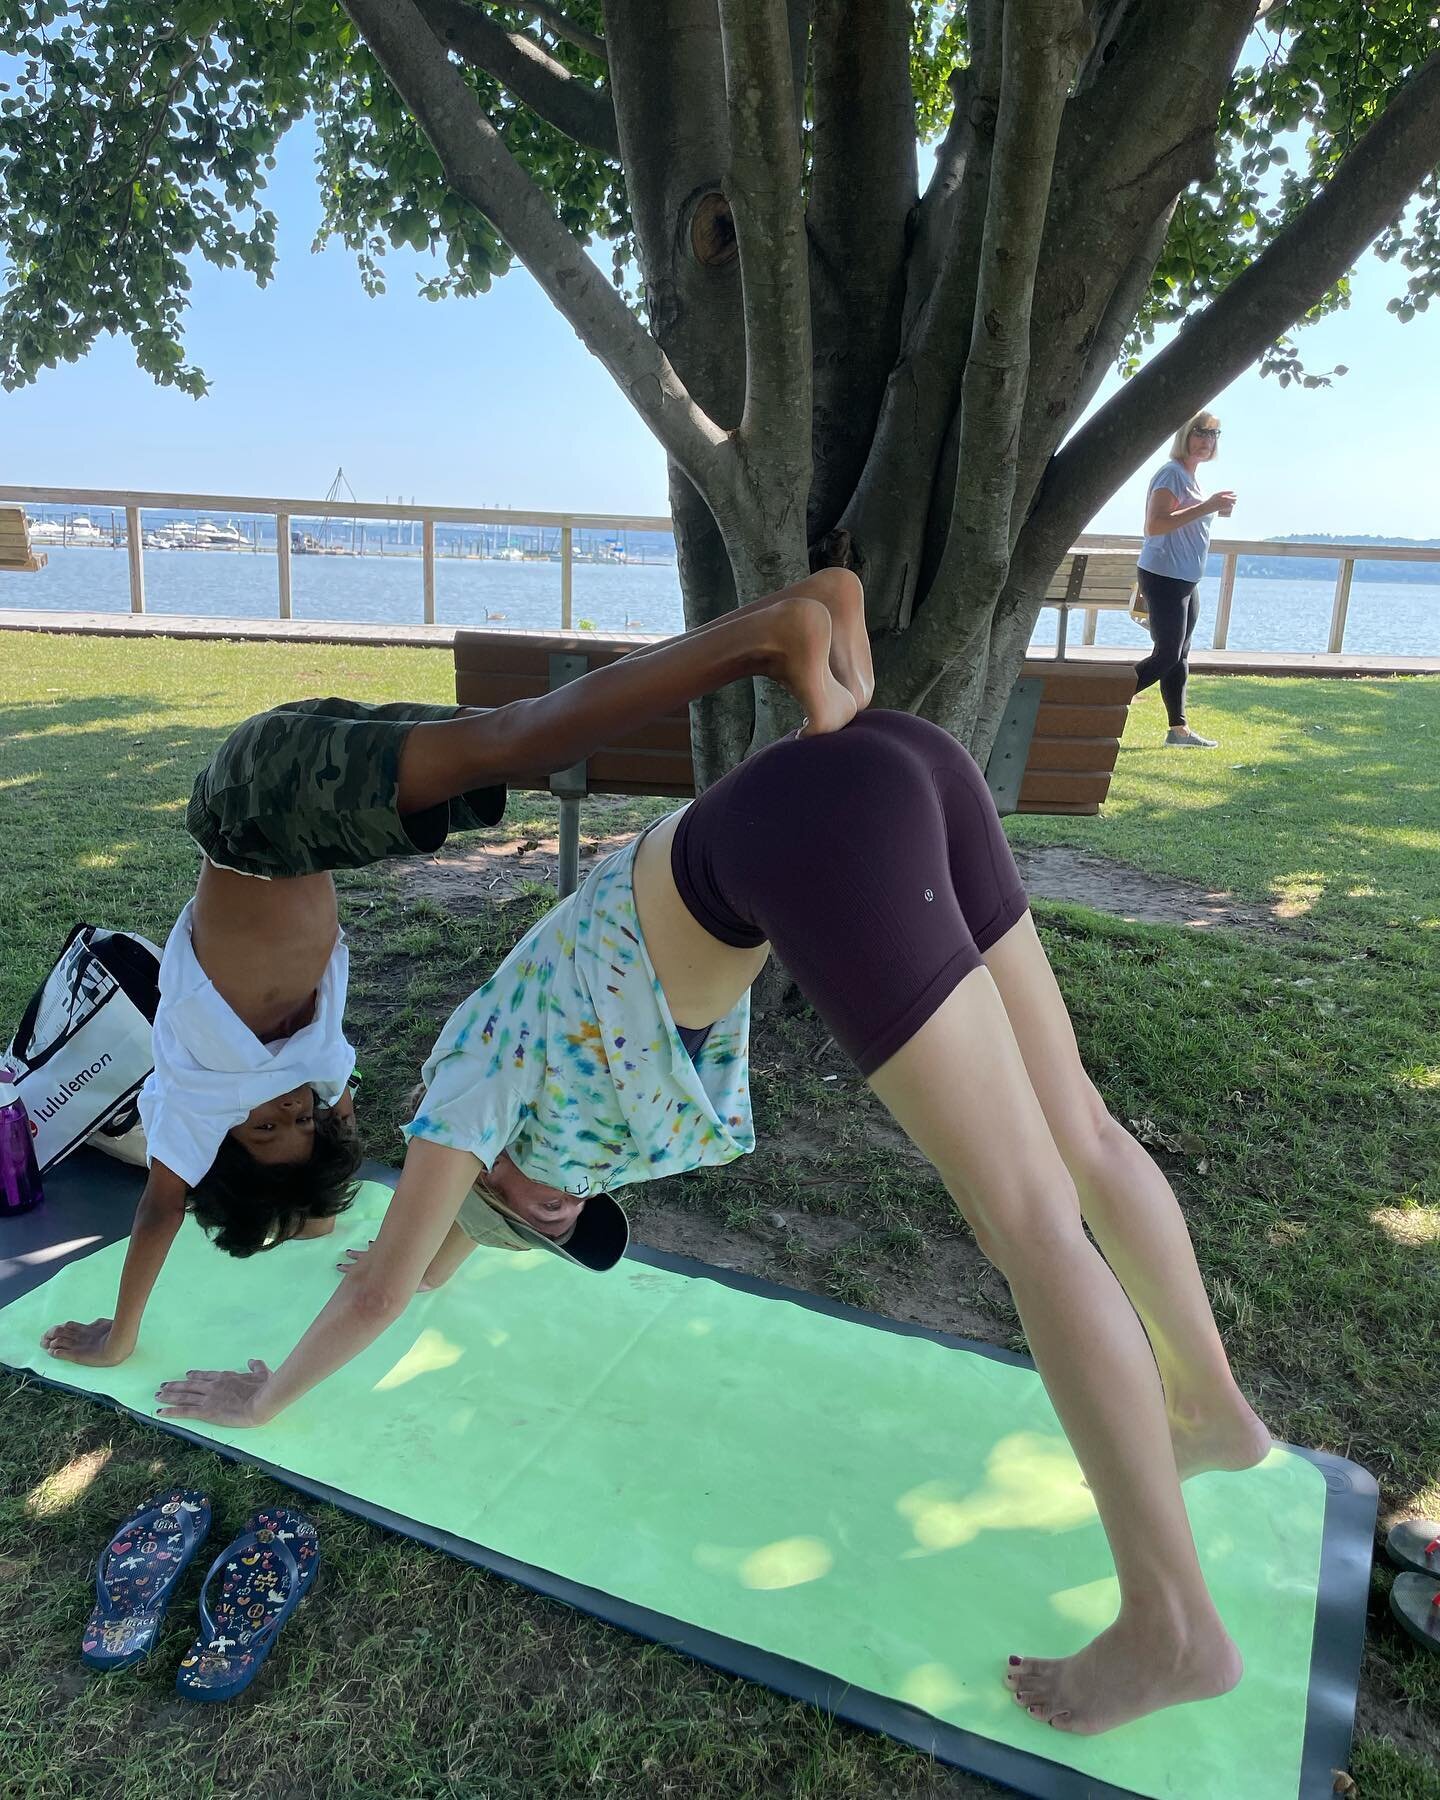 Flow with us by the gorgeous Hudson River this Saturday&mdash;we&rsquo;ve planned a wonderful morning of yoga + mindfulness ... 🌊🌿

8-9:00 Yoga Flow (adults)
9-9:45am Kids Yoga (drop-off)
10am-10:45am Family Yoga

The exchange is $22 drop in for ki